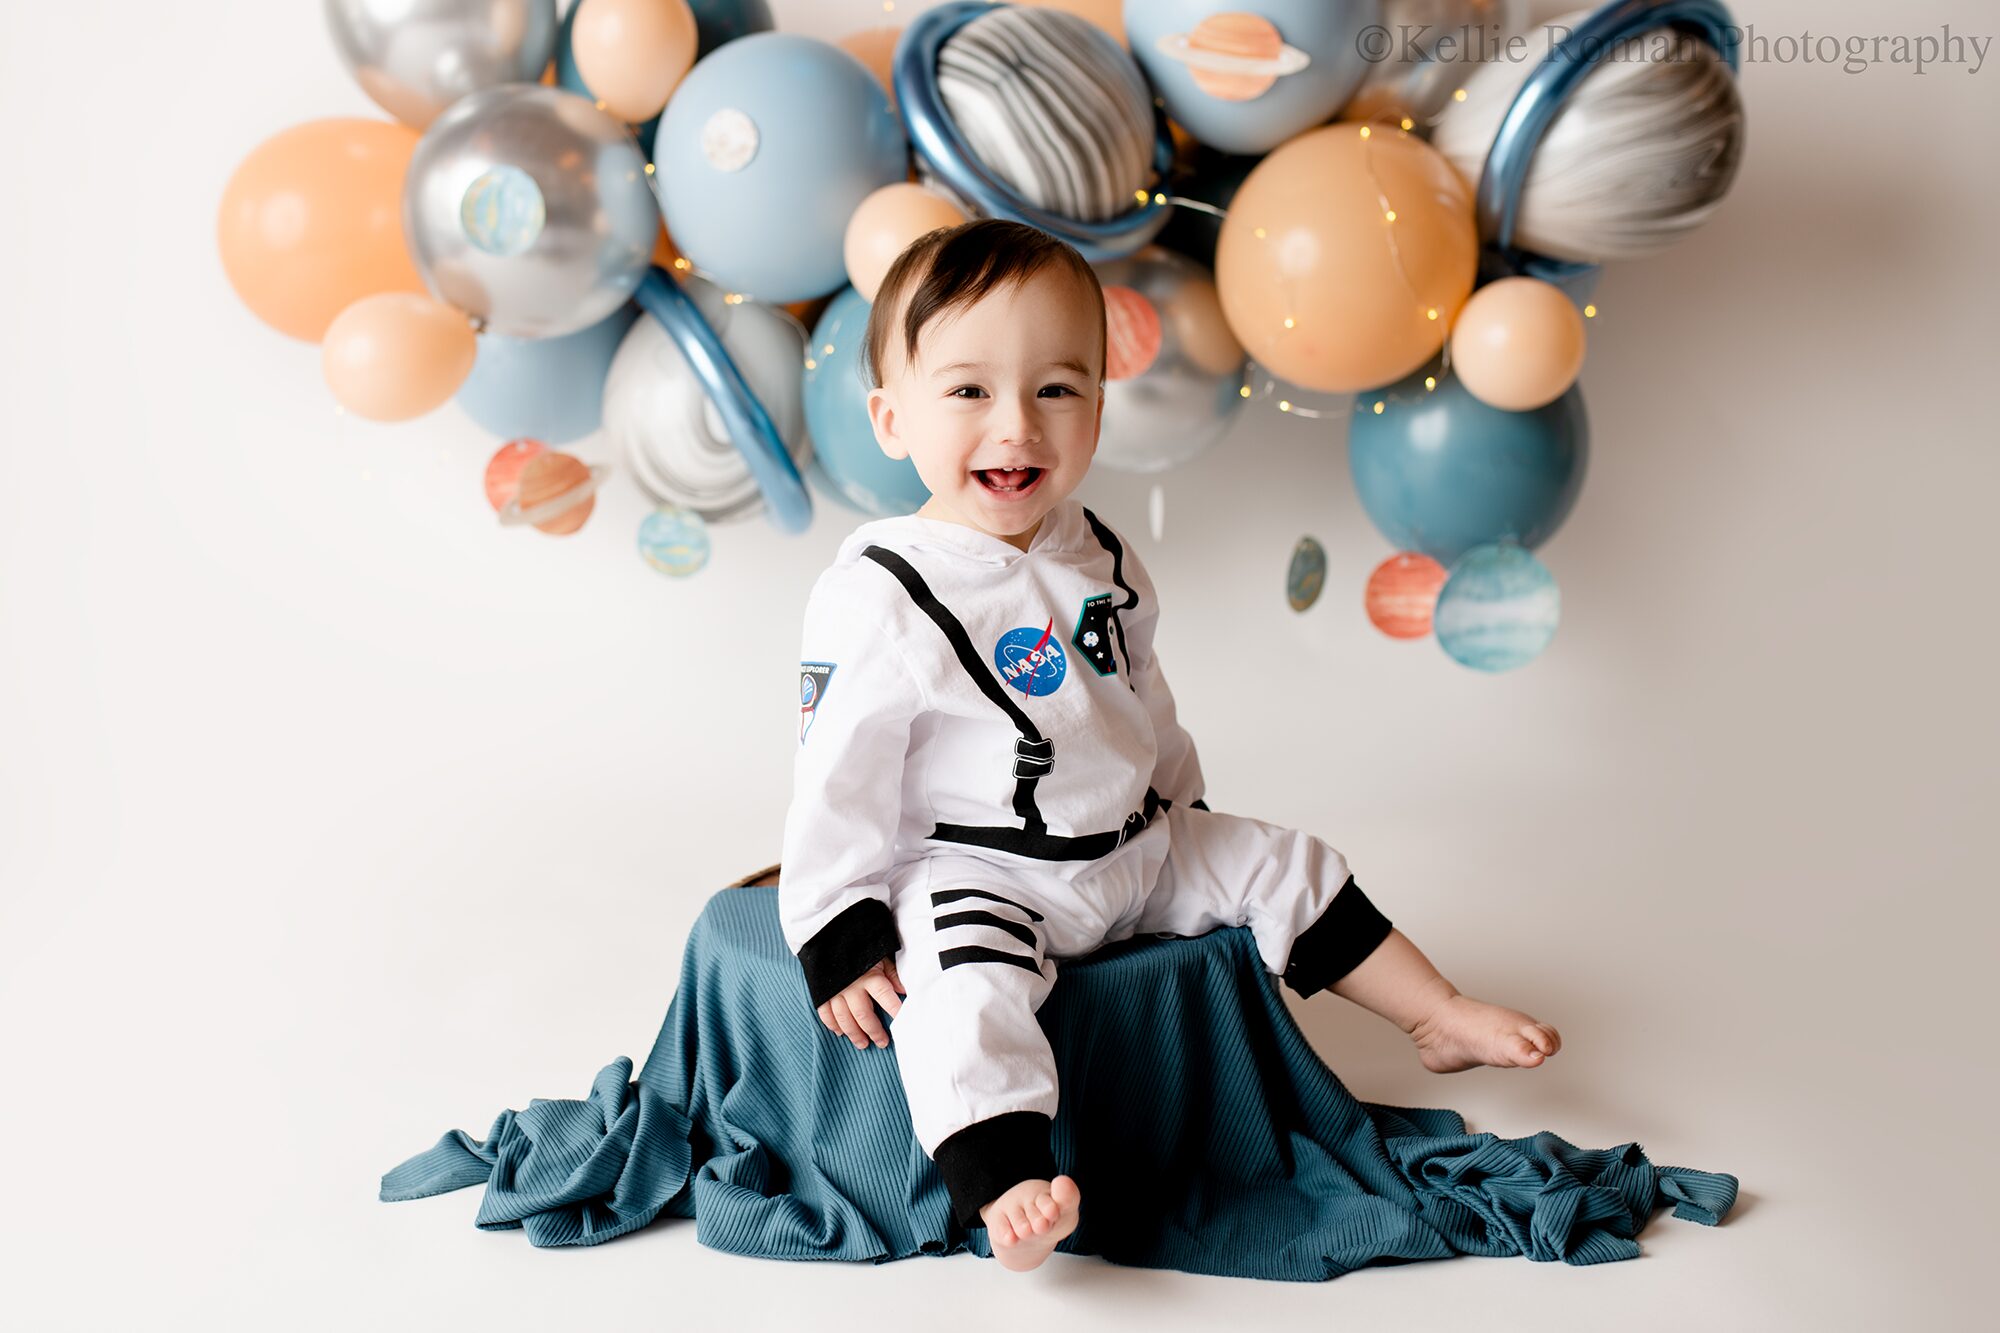 space cake smash. one year old boy in greendale photography studio. the backdrop is white with a blue, silver, and beige balloons garland. there are small lights and planets on the balloons. the boy is sitting on a wood tub, with a blue fabric over it. he's wearing a space onsie and smiling.